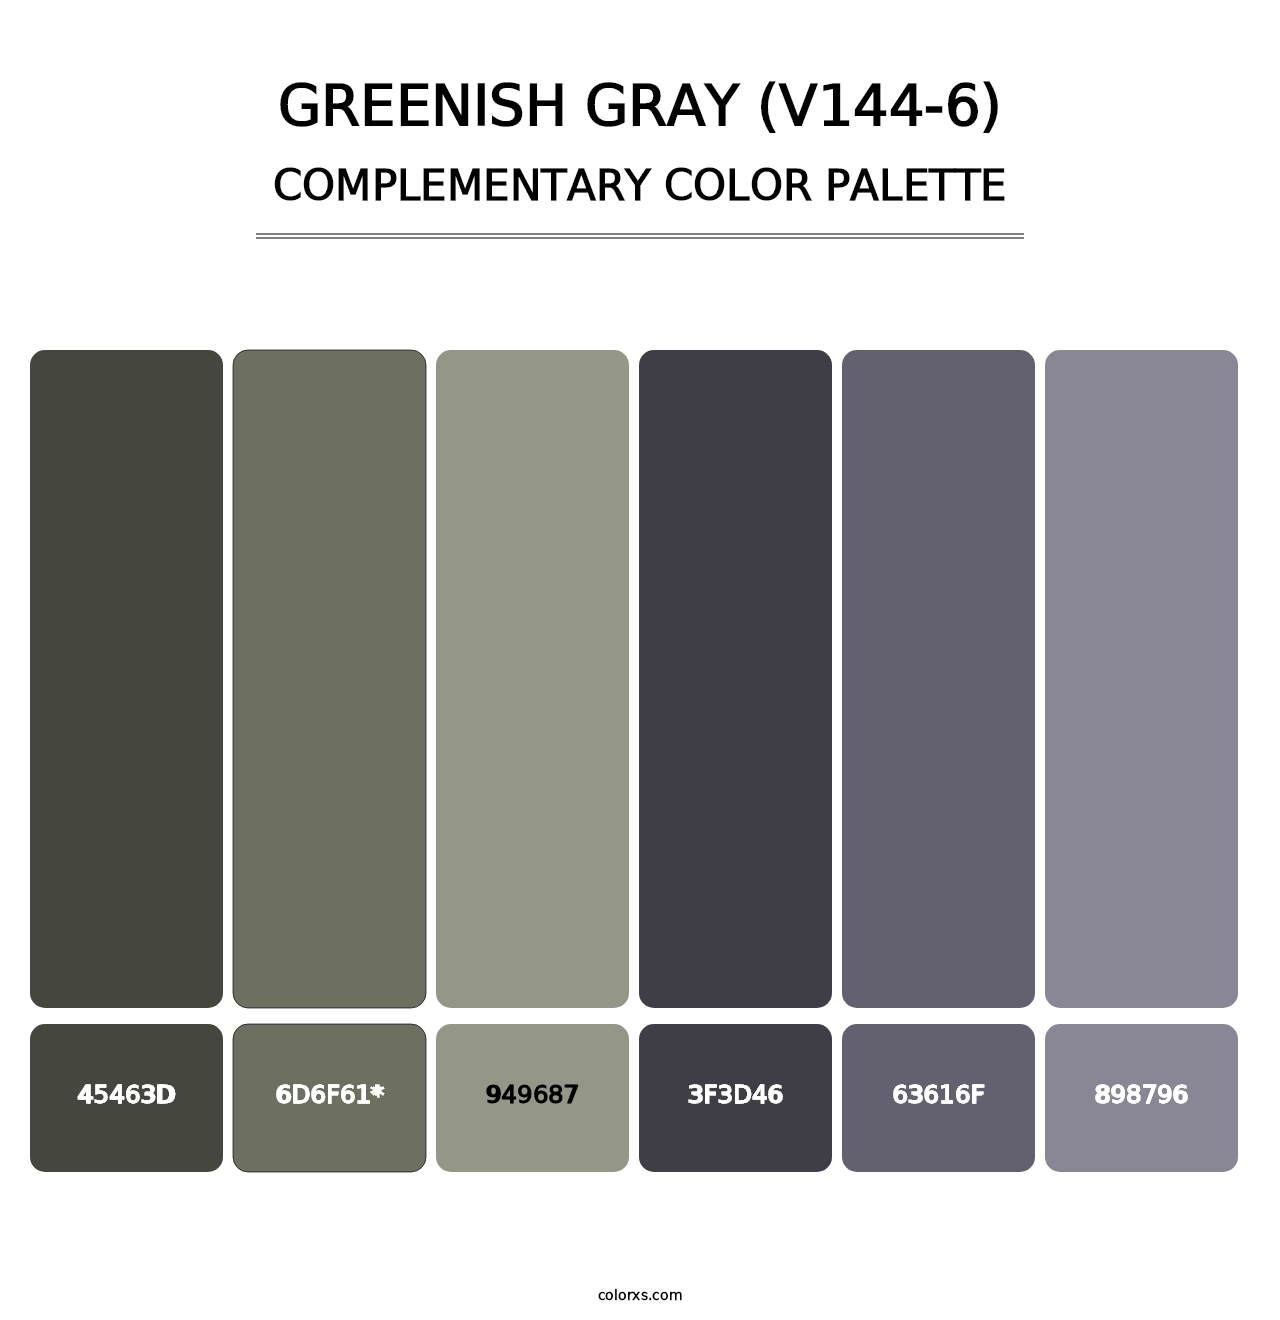 Greenish Gray (V144-6) - Complementary Color Palette